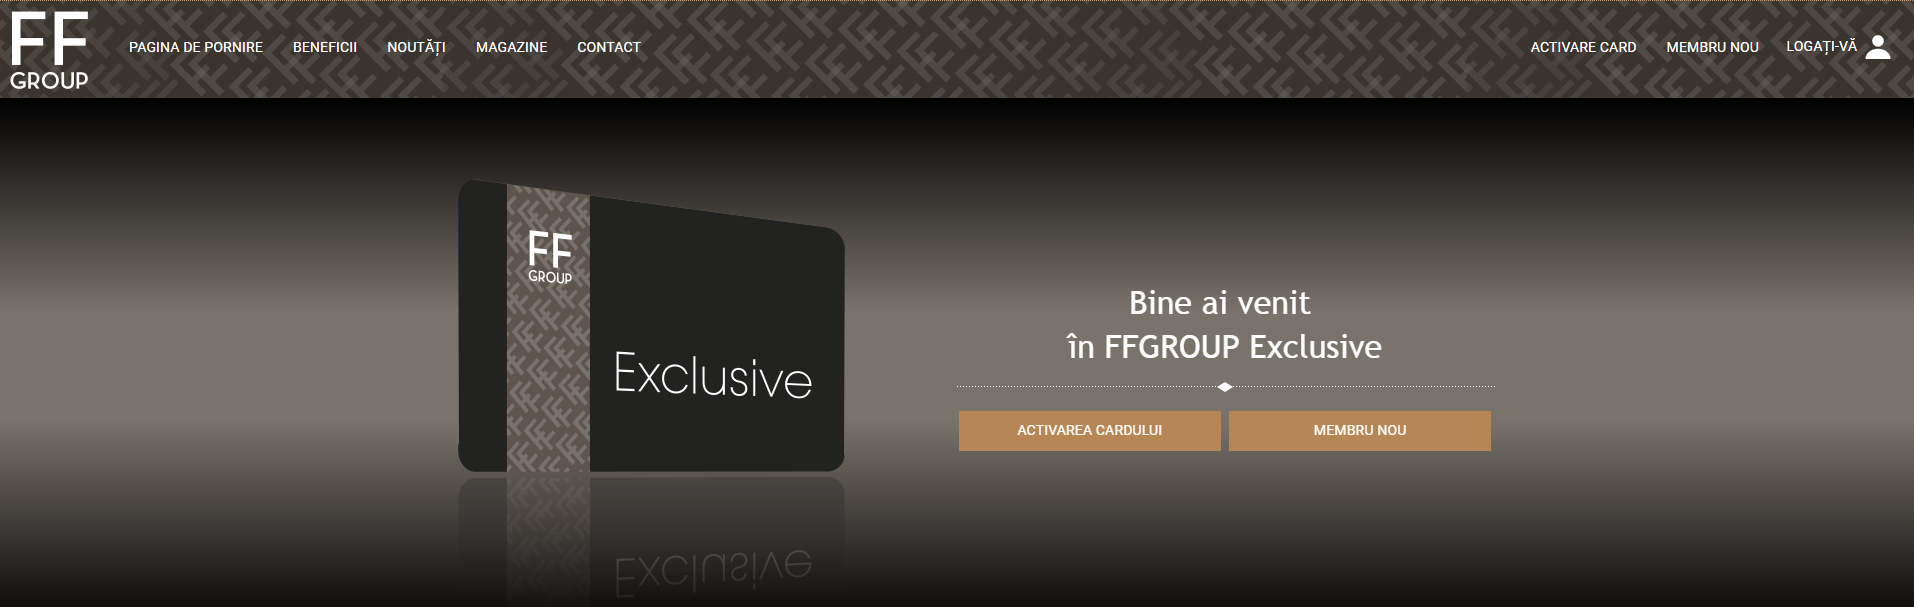 FFGROUP Exclusive customer loyalty program by QIVOS